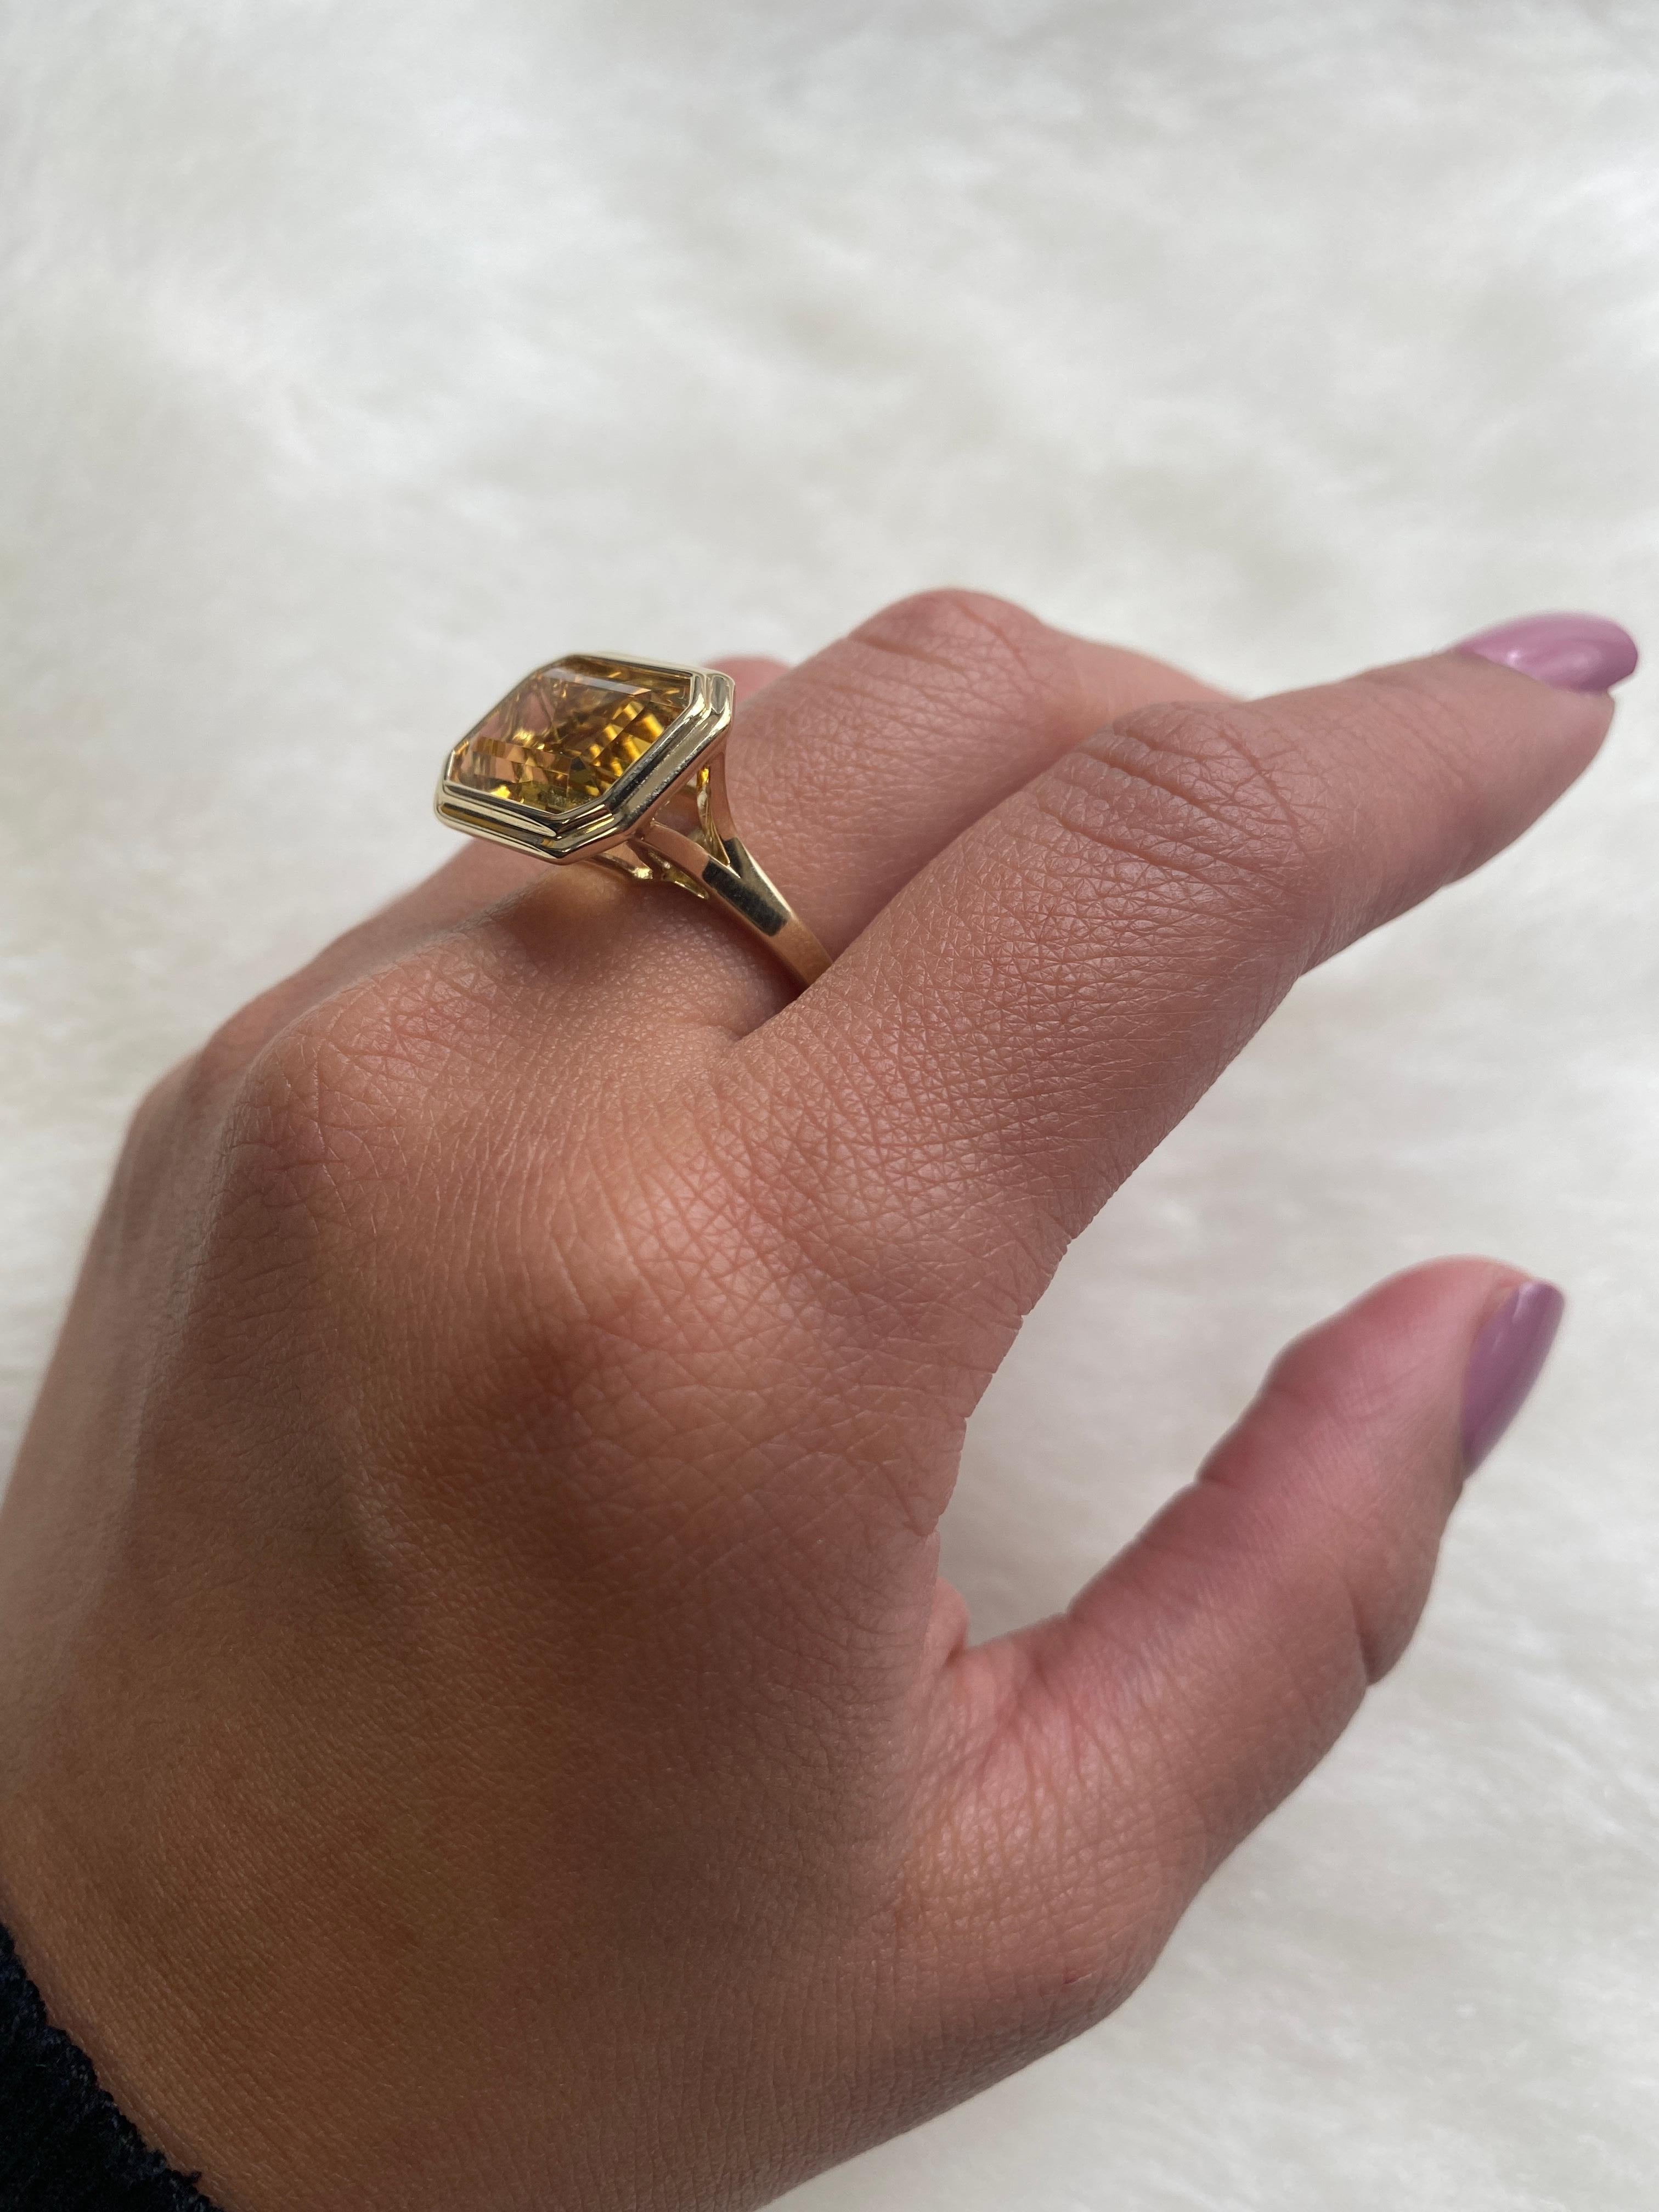 East-West Citrine Emerald Cut Bezel Set Ring in 18K Yellow Gold, from 'Manhattan' Collection.  Minimalist lines yet bold structures is what our Manhattan Collection is all about. Our pieces represent the famous skyline and cityscapes of New York